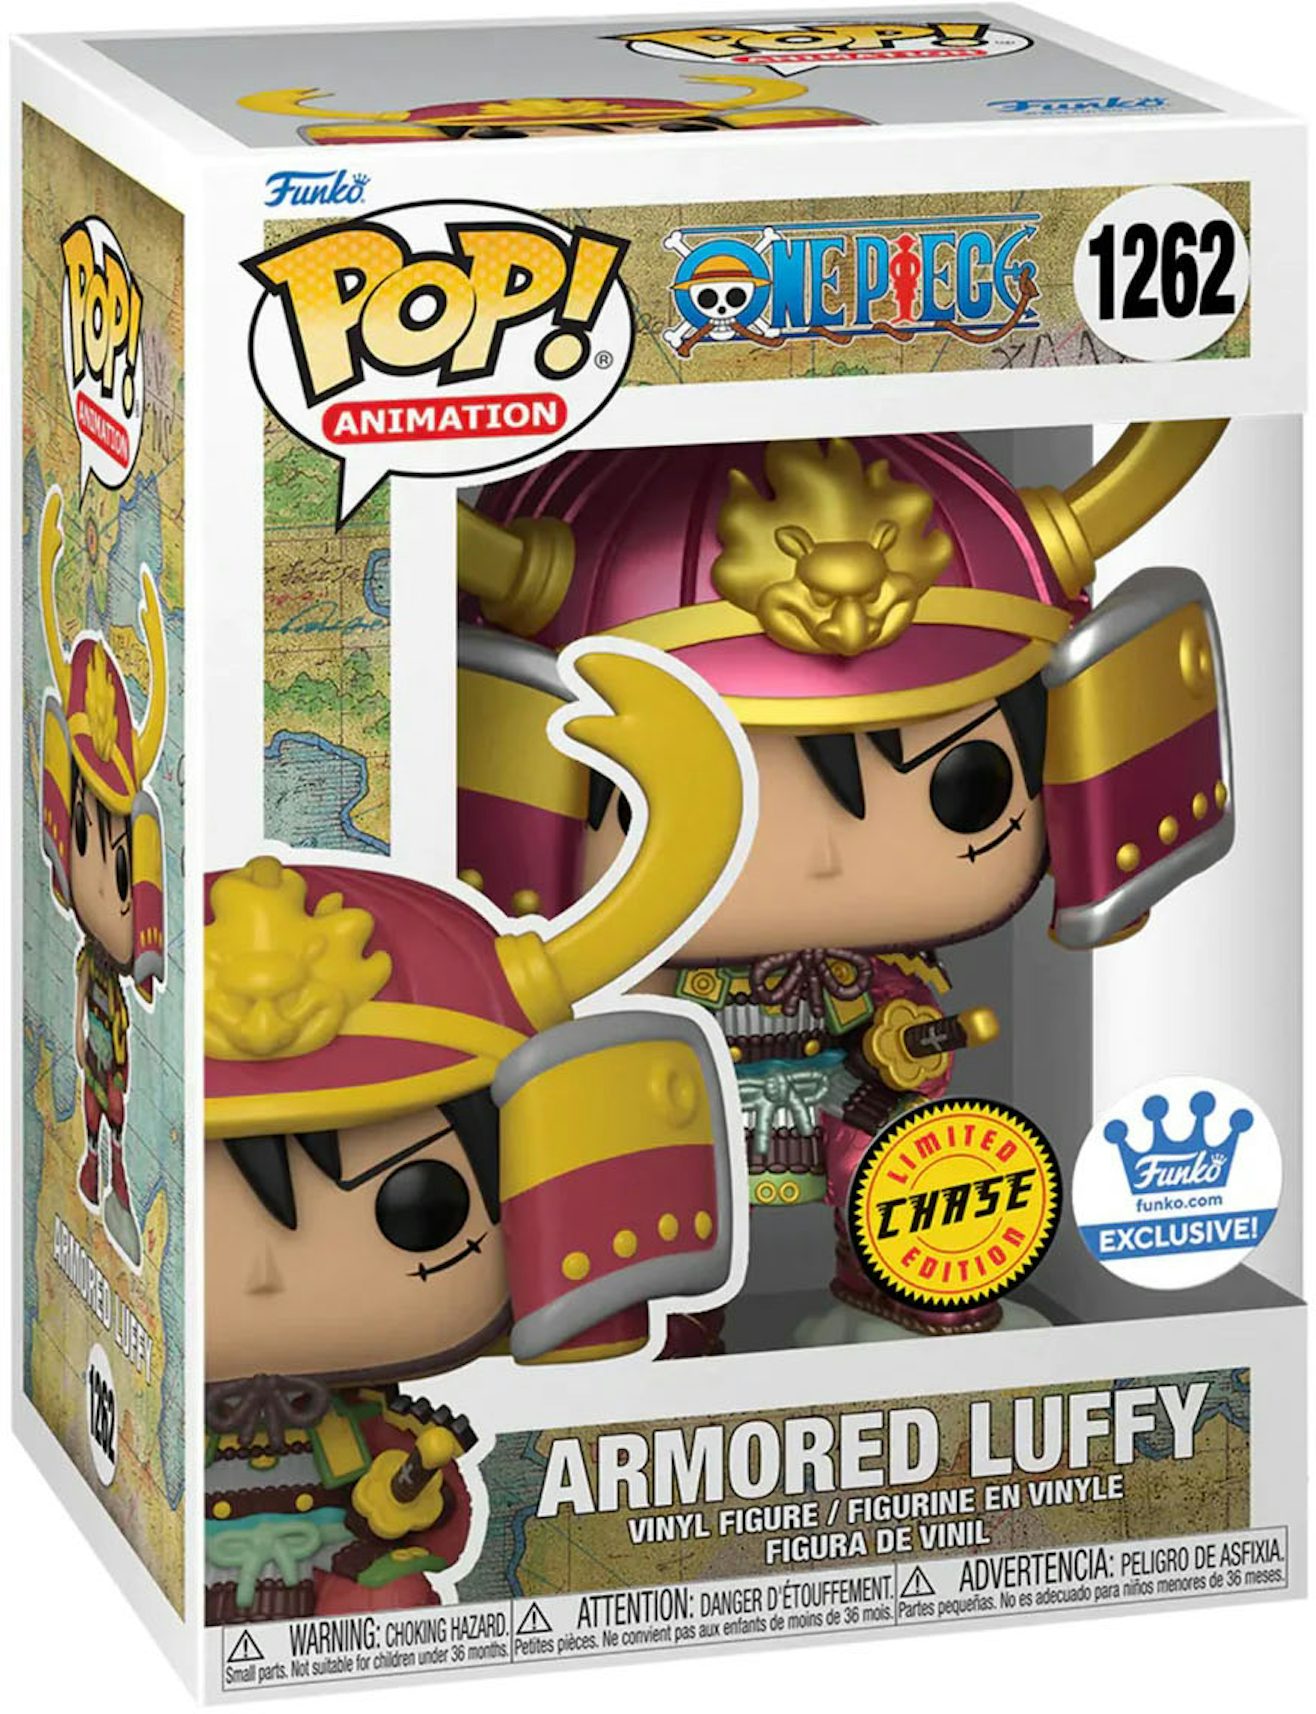 Funko Pop! Animation One Piece Armored Luffy Chase Edition Funko Shop  Exclusive Figure #1262